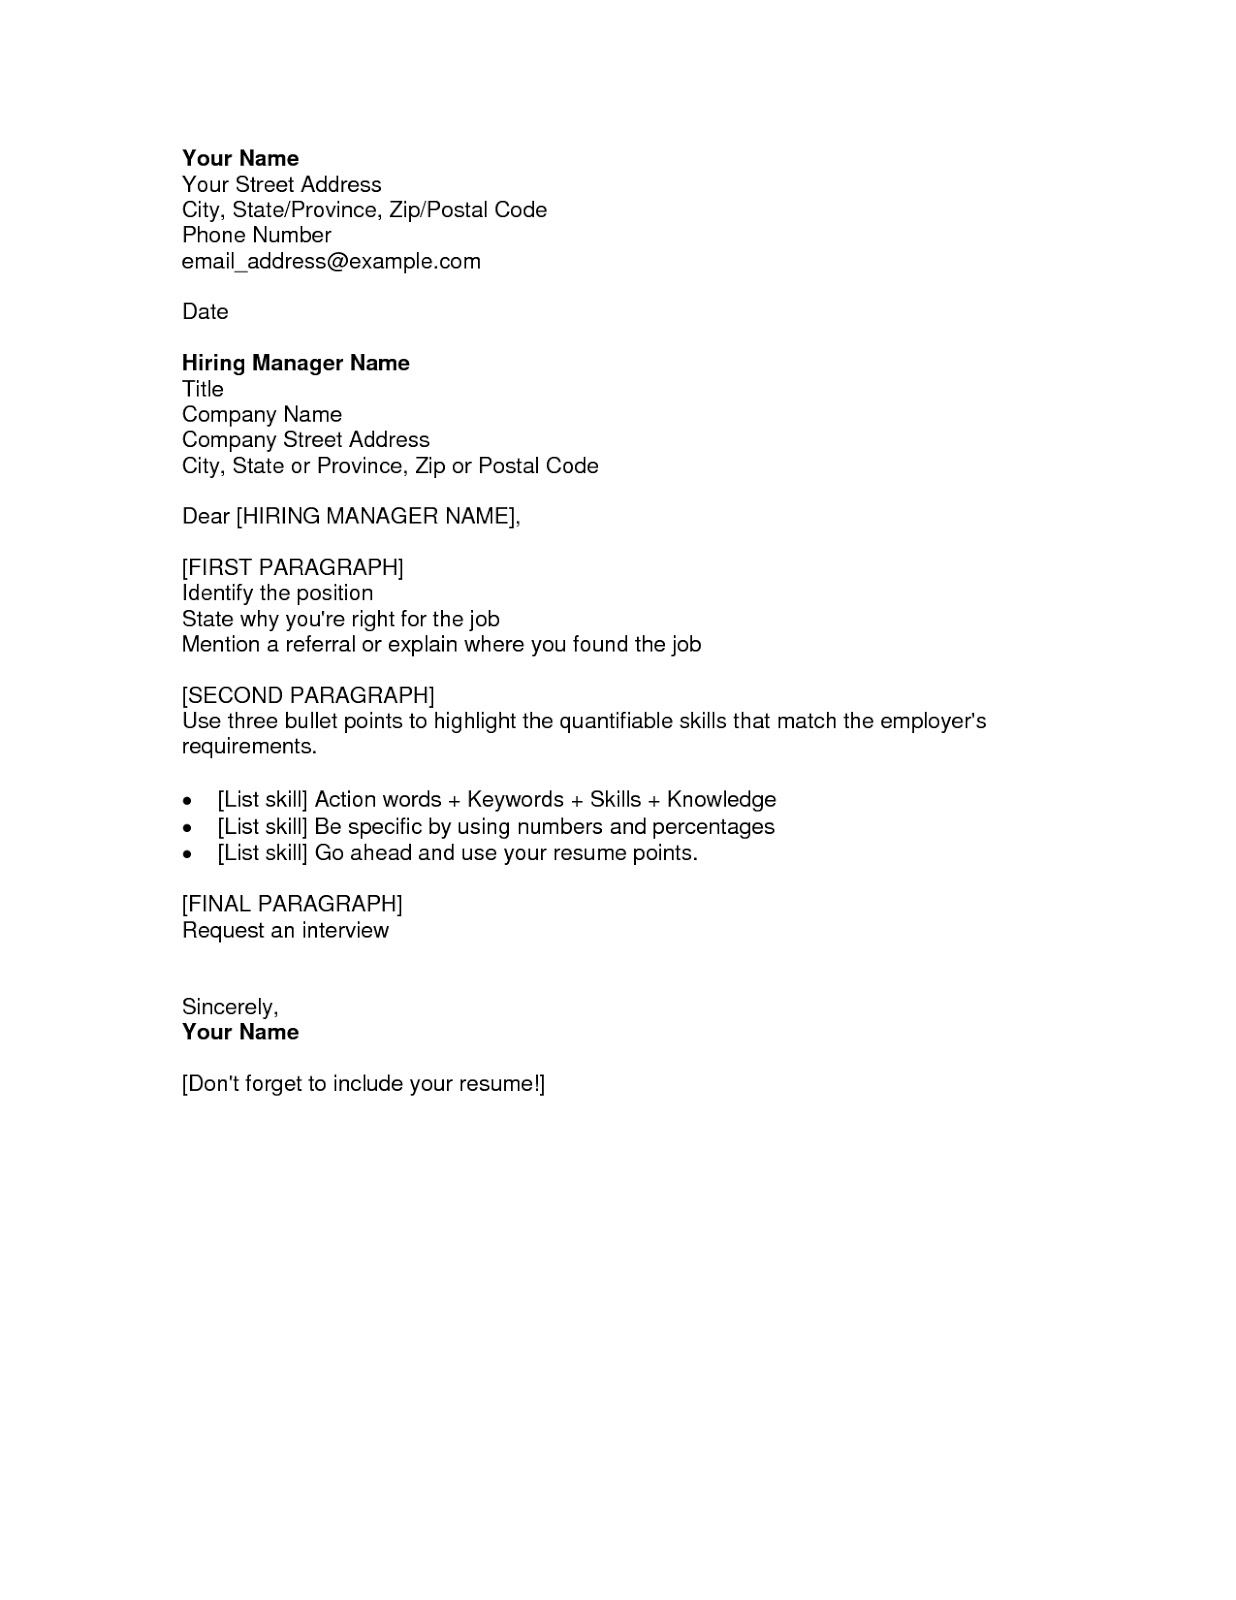 Free cover letter templates